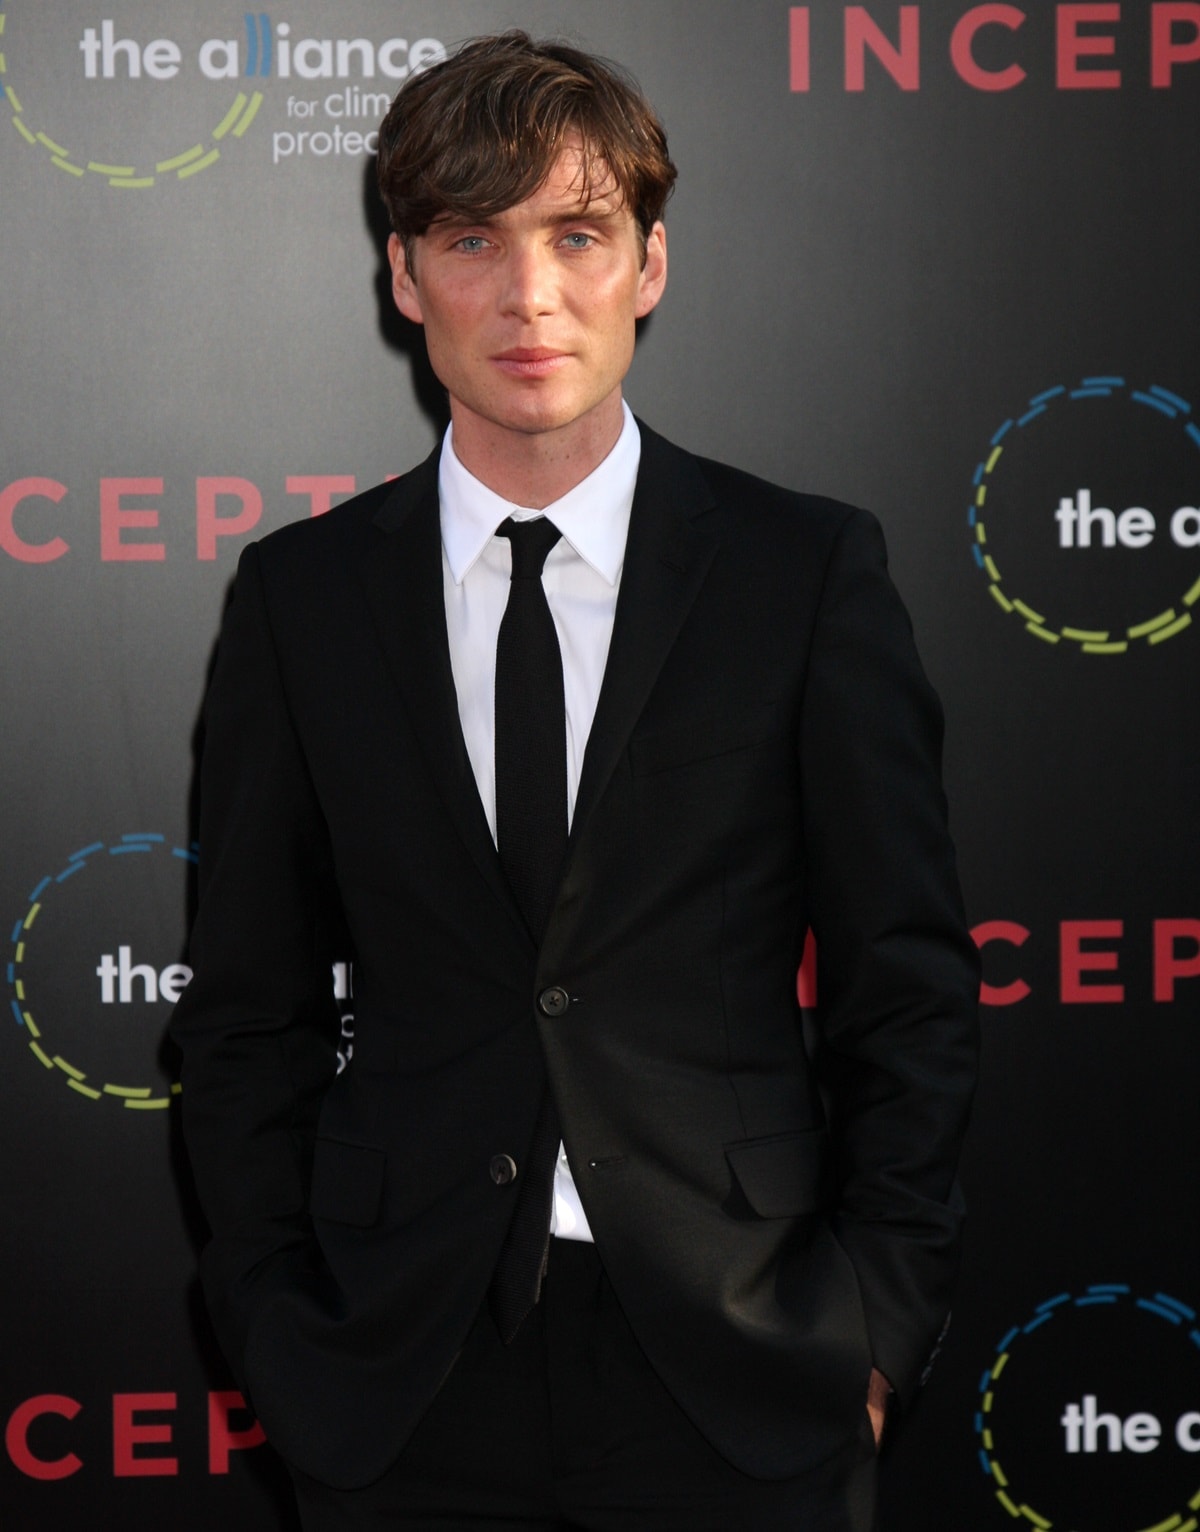 Cillian Murphy suited up at the premiere of Inception